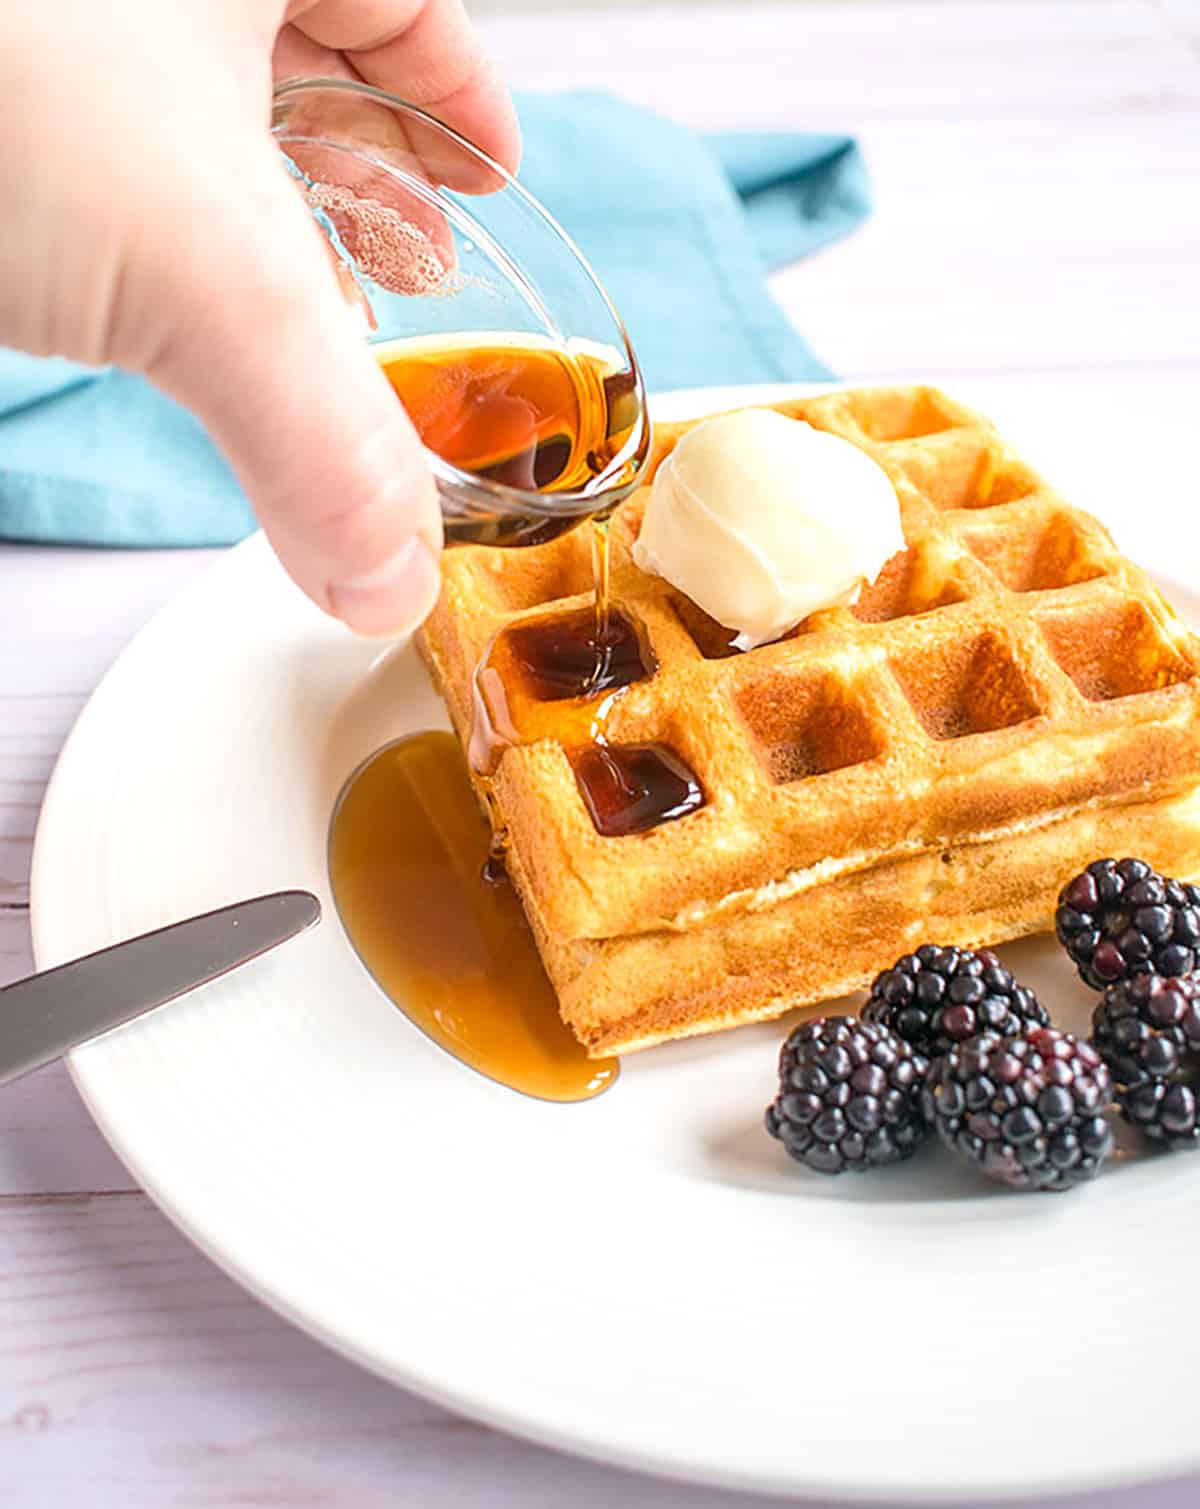 syrup being poured over homemade waffles, butter and blackberries.